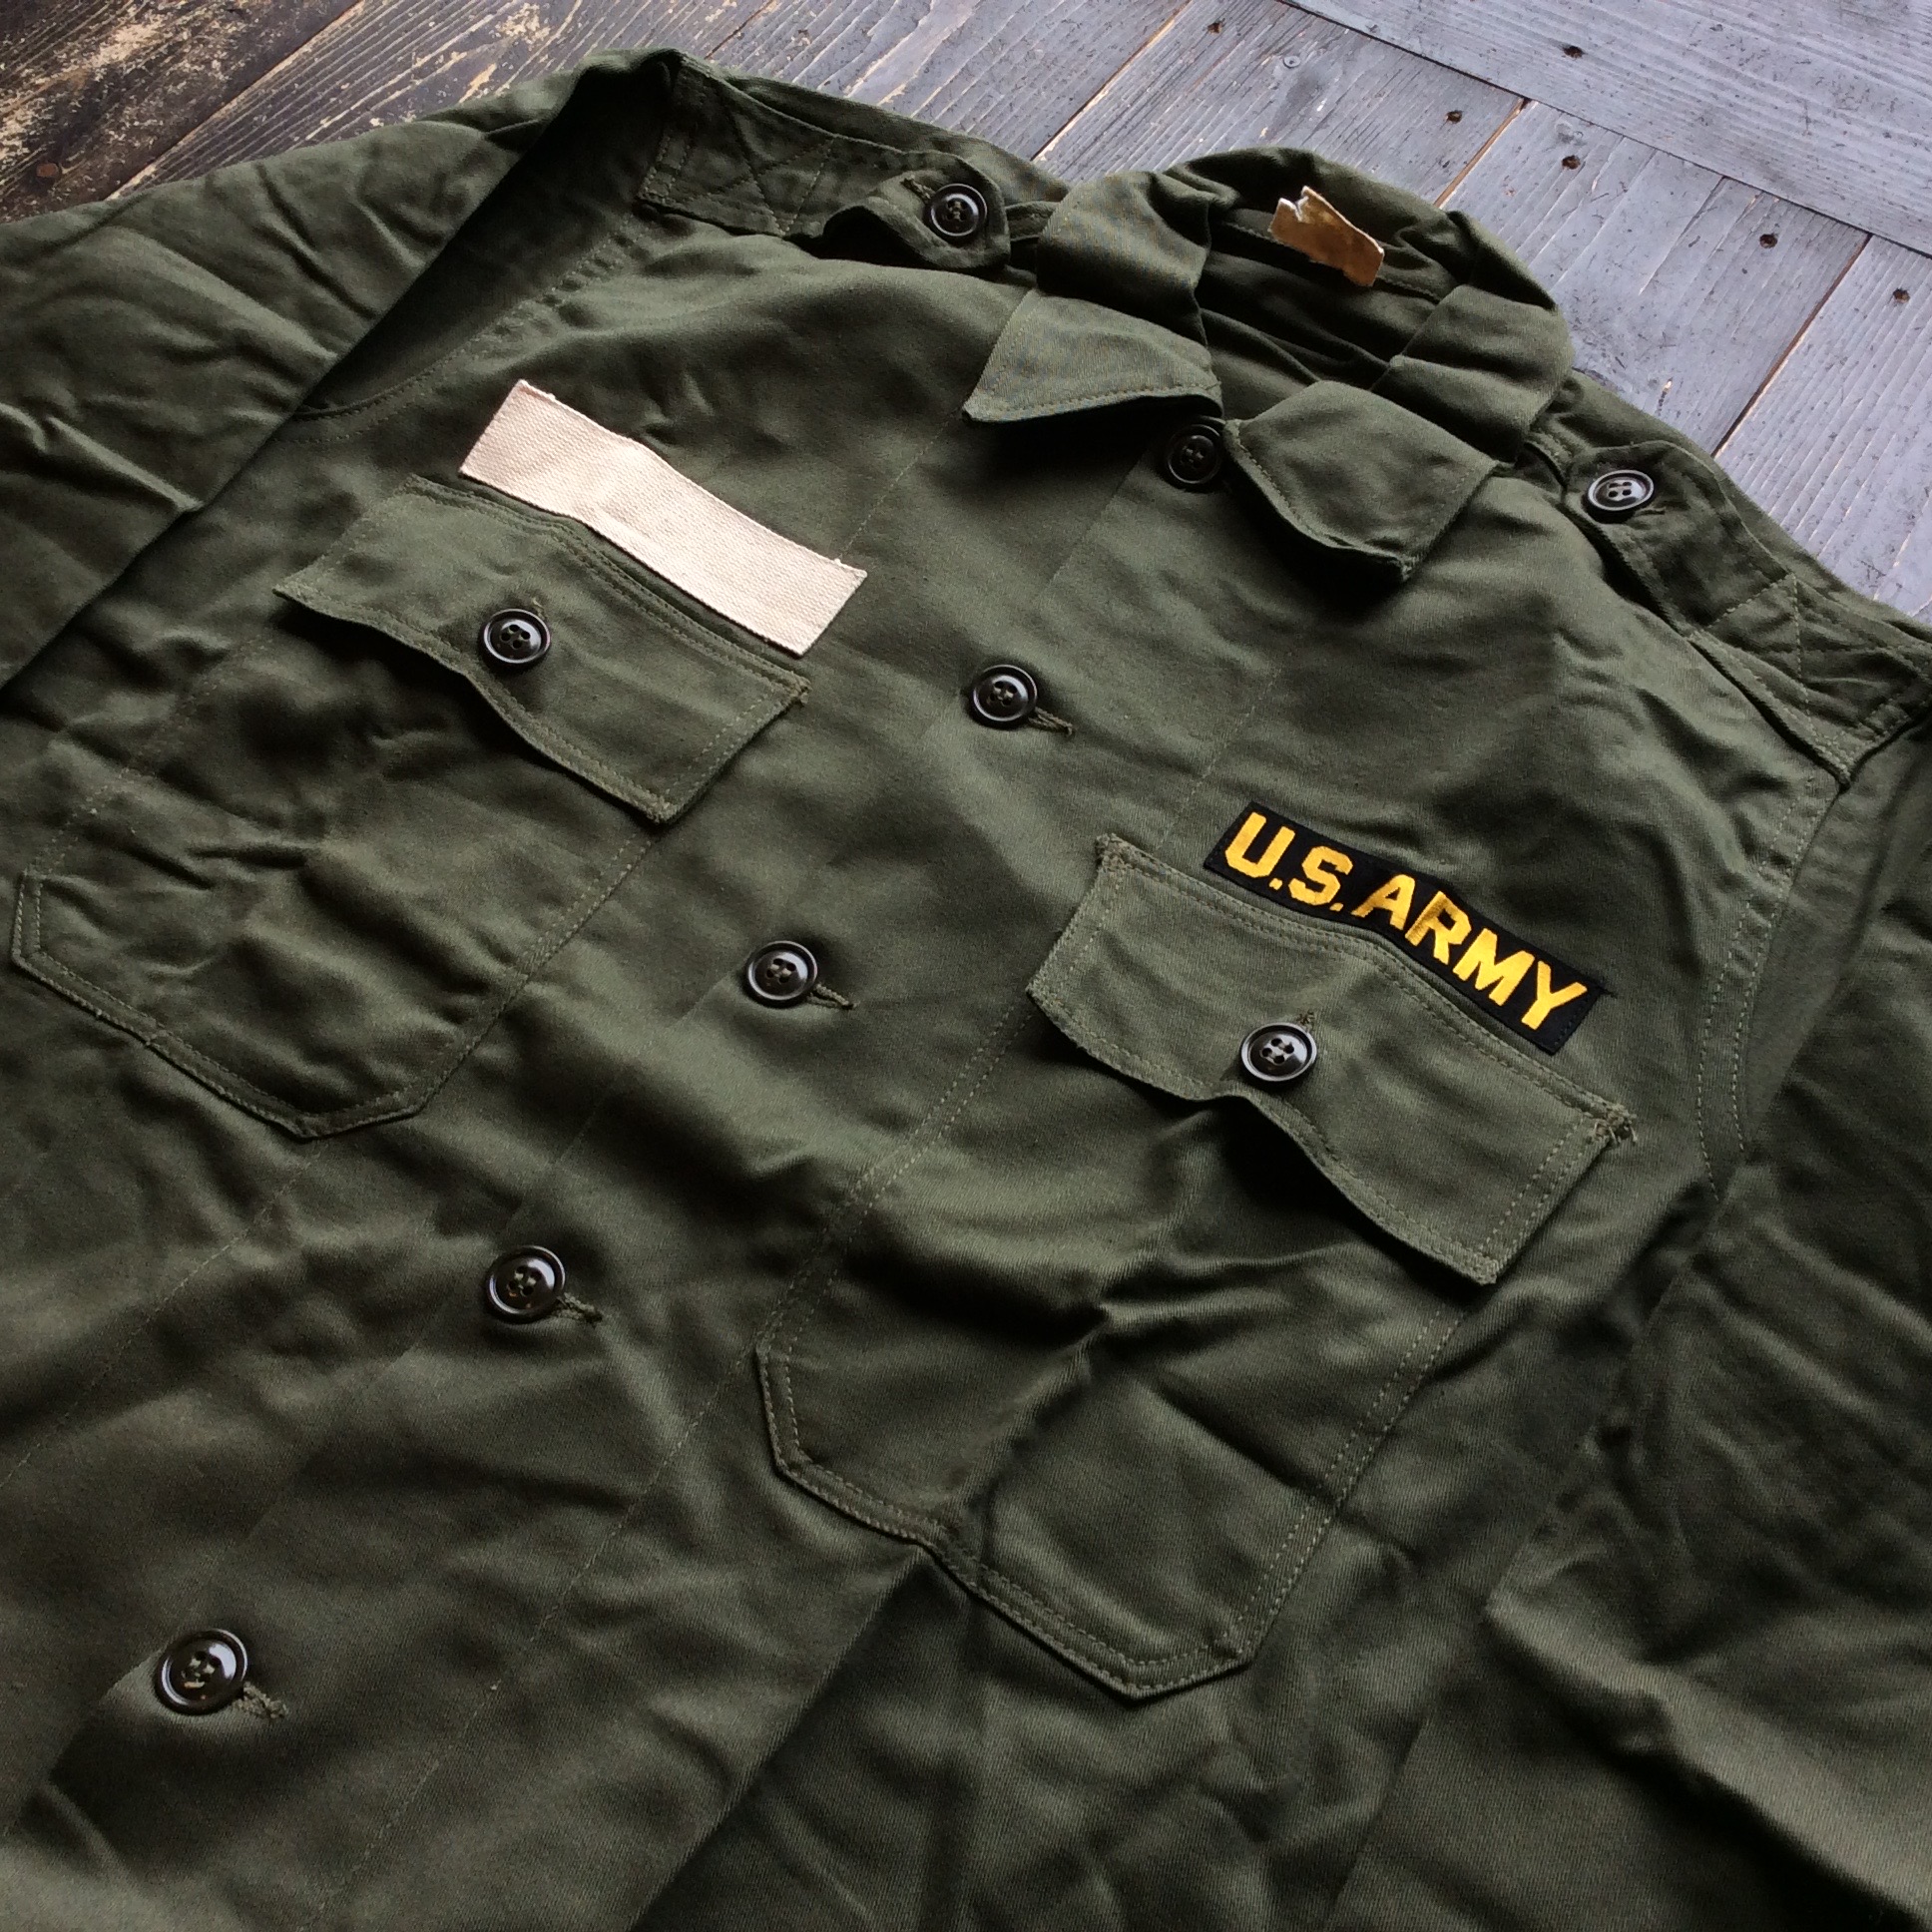 NOS 50's U.S.Army utility shirt | Button Up Clothing